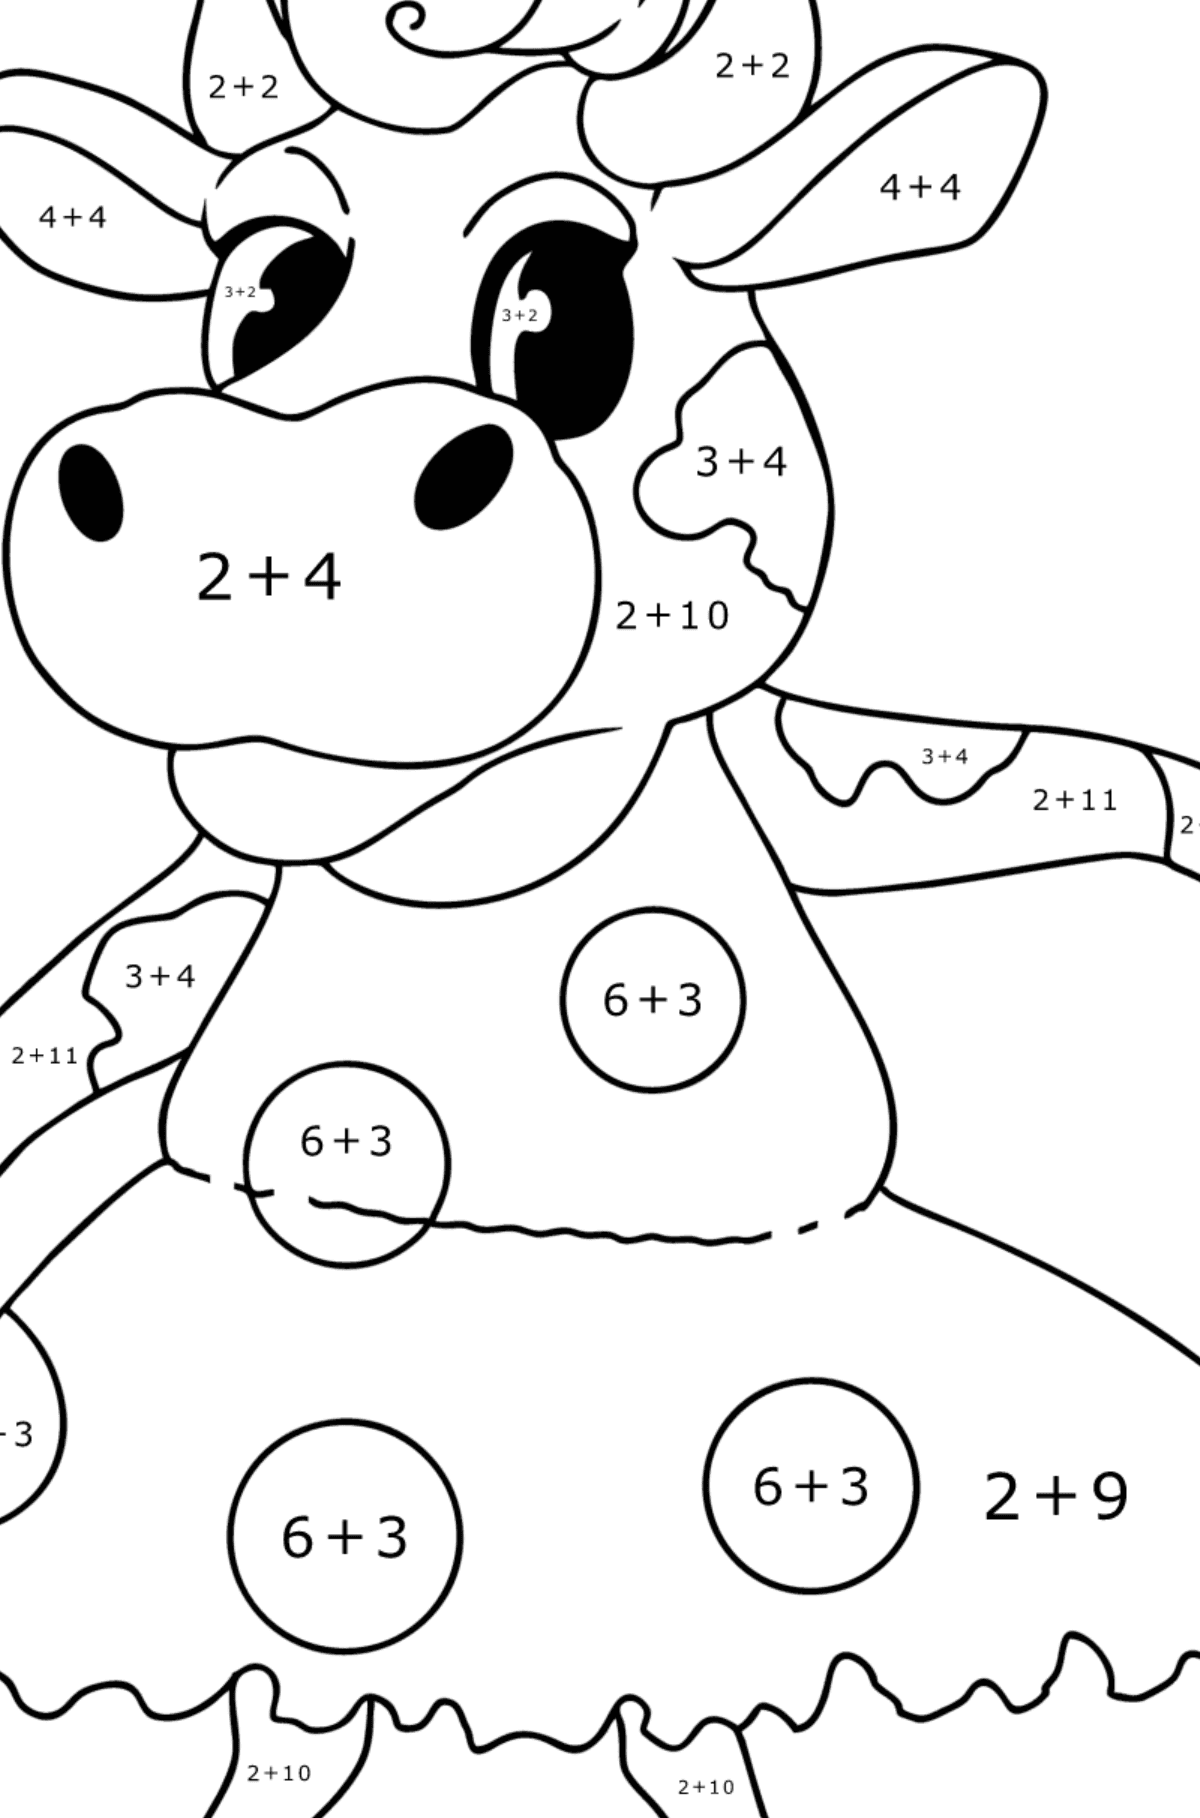 Kawaii cow standing up coloring page - Math Coloring - Addition for Kids